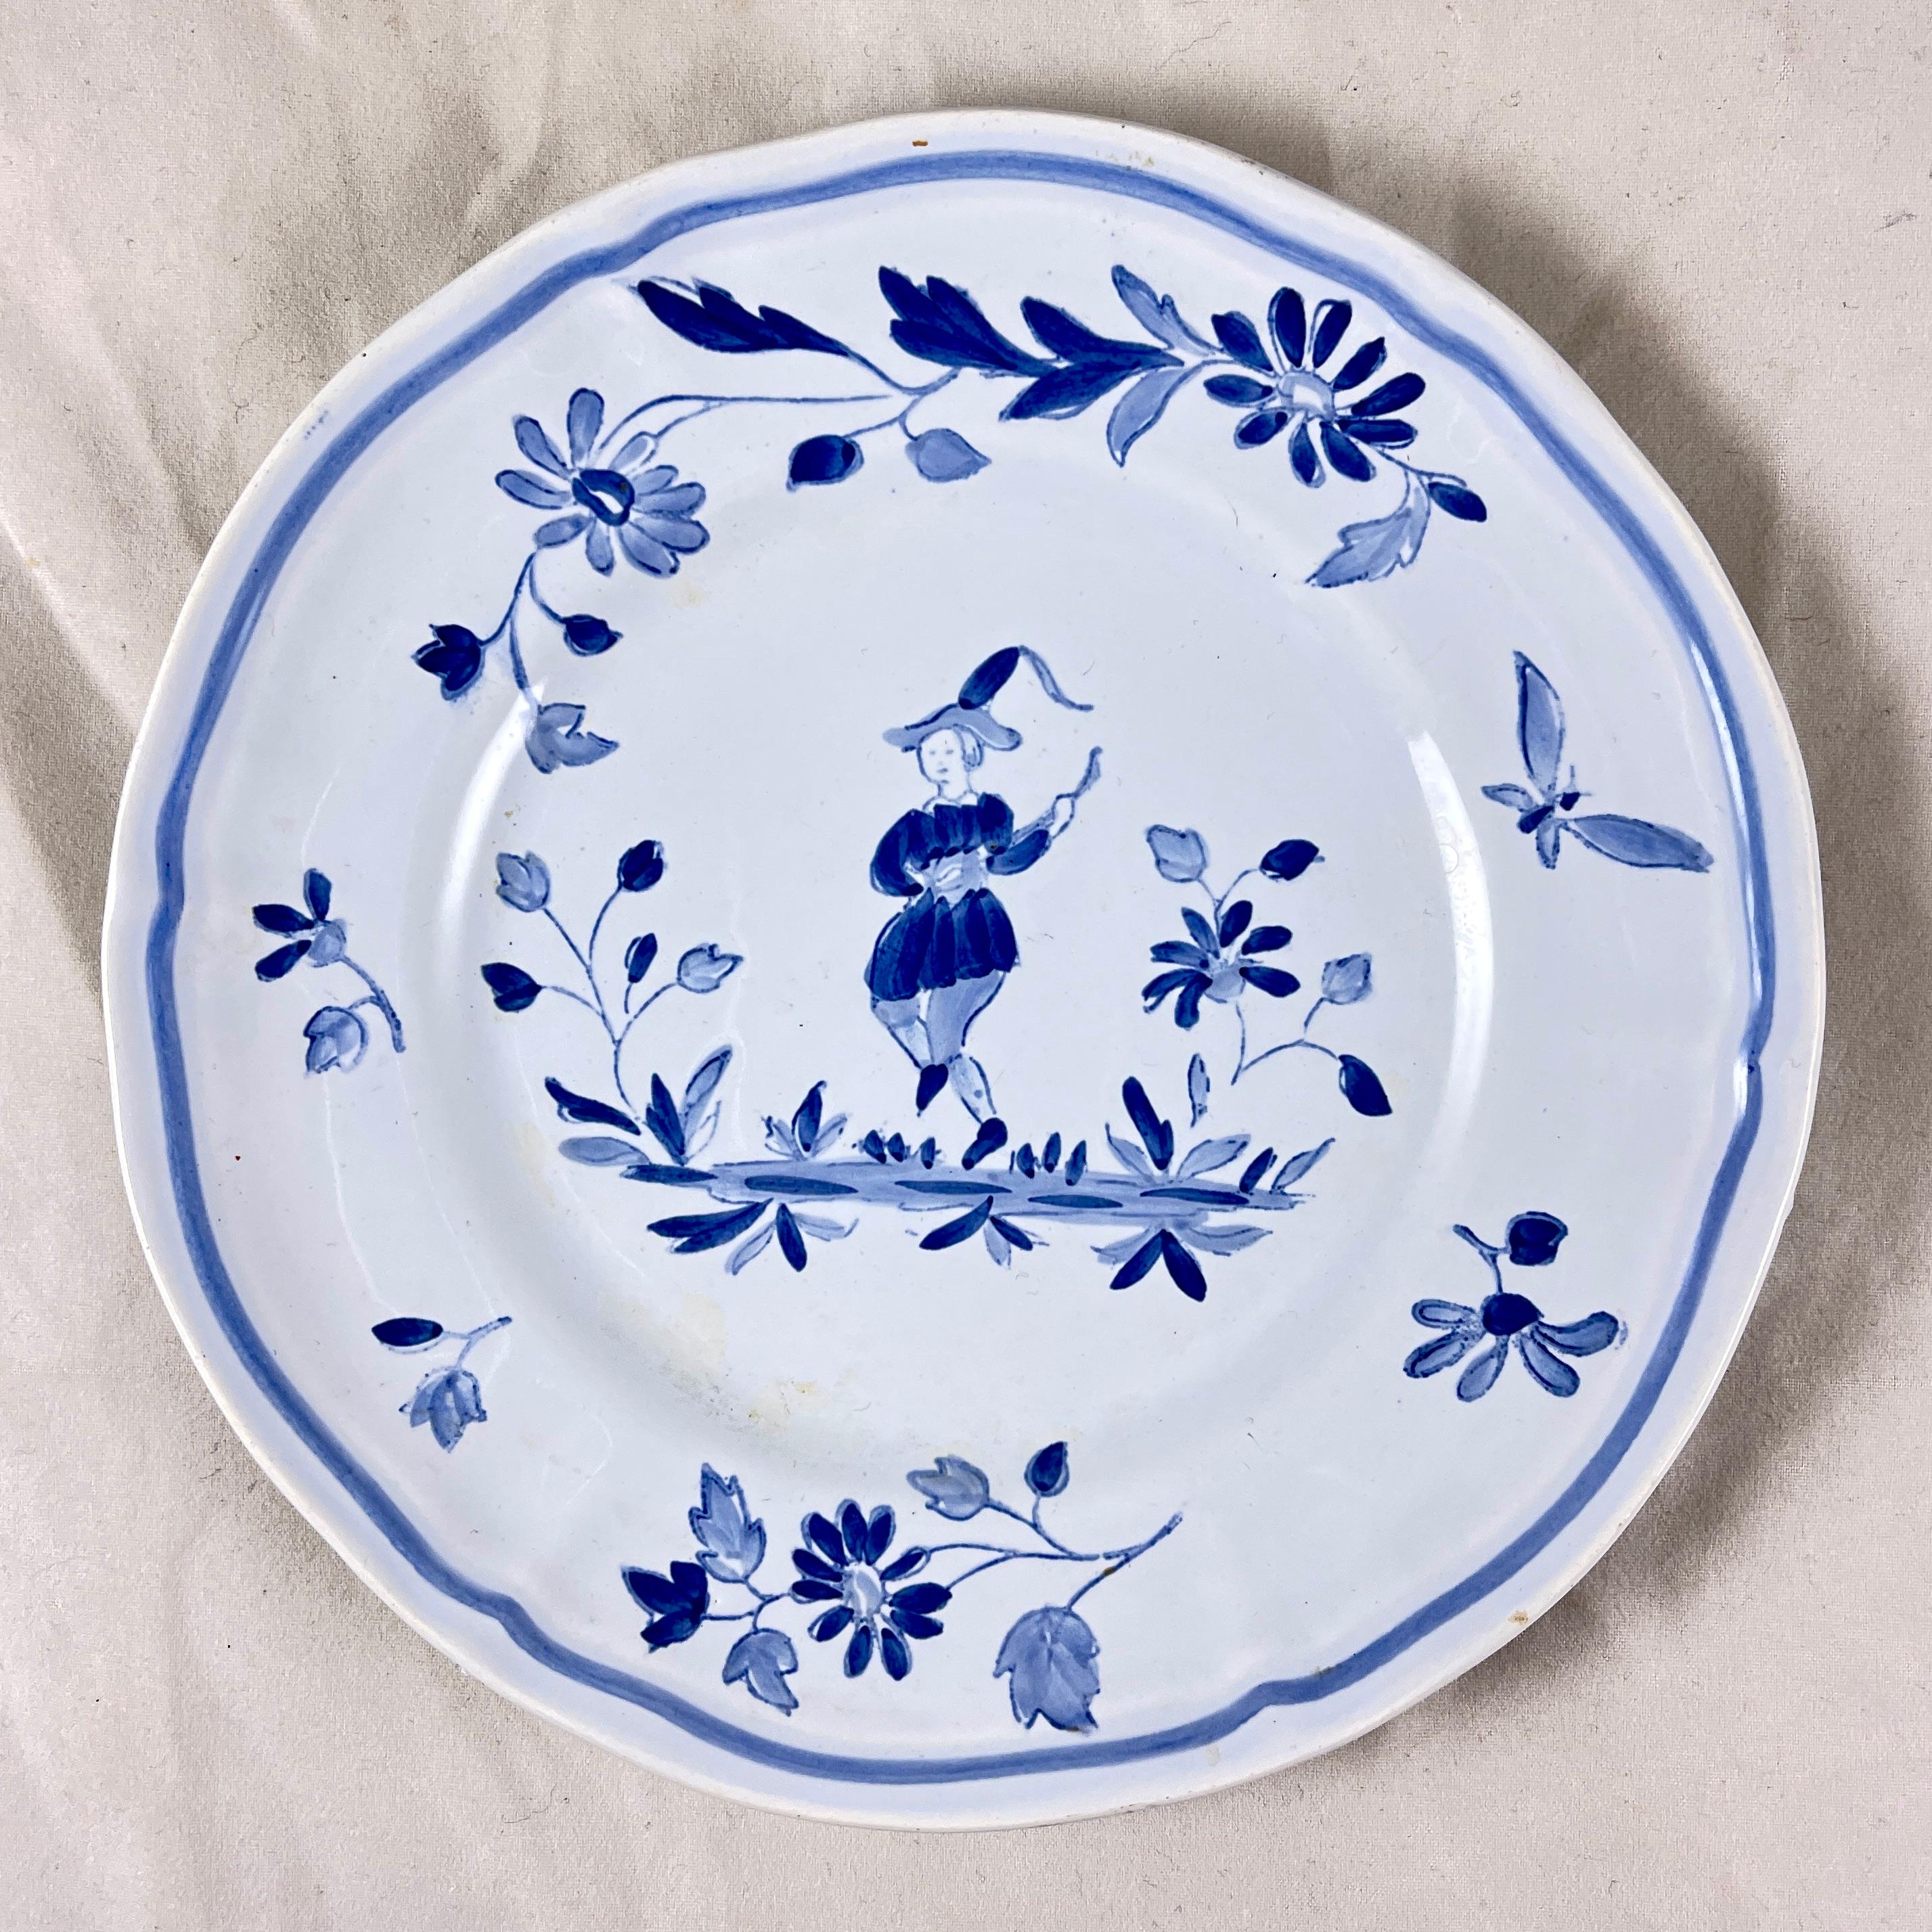 In the Moustiers pattern, a set of four hand painted canapé plates, Longchamps, France, circa 1950-1960.

A charming, traditional pattern in blue on a clean, creamy white ground, showing a central figure dancing among flowers and a butterfly. A